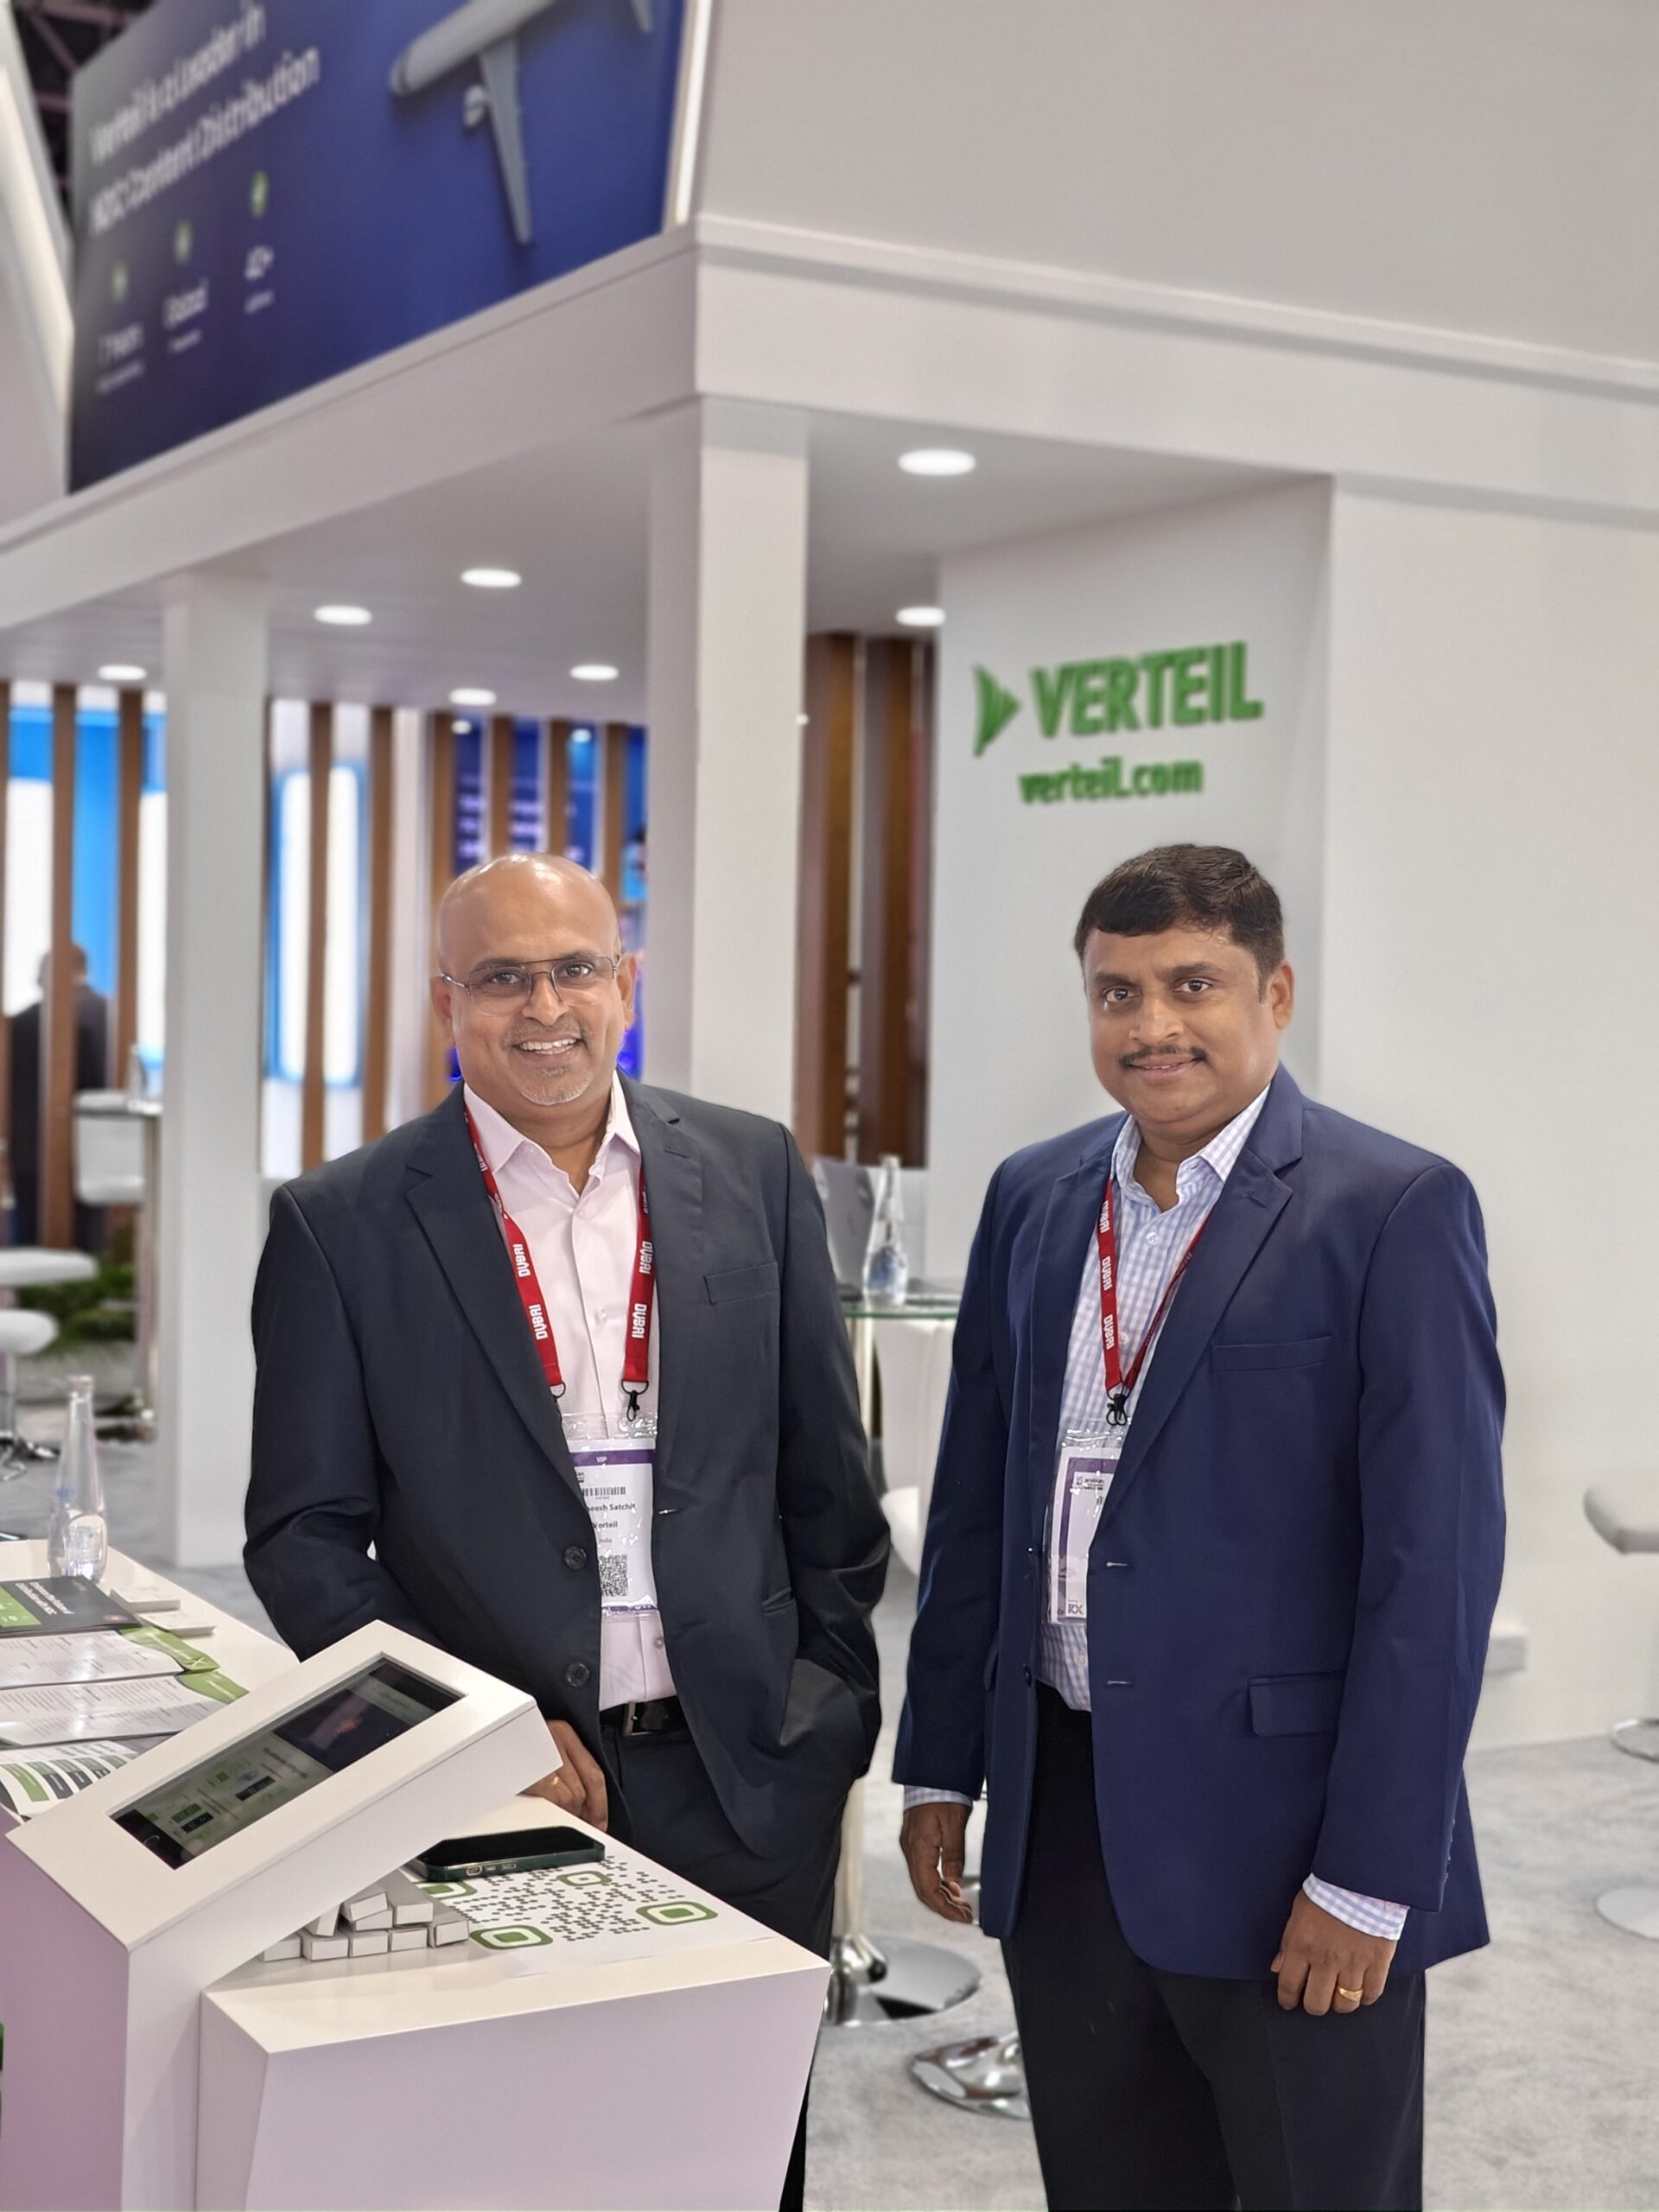 Verteil Technologies showcases its cutting-edge NDC solutions at ATM 2023